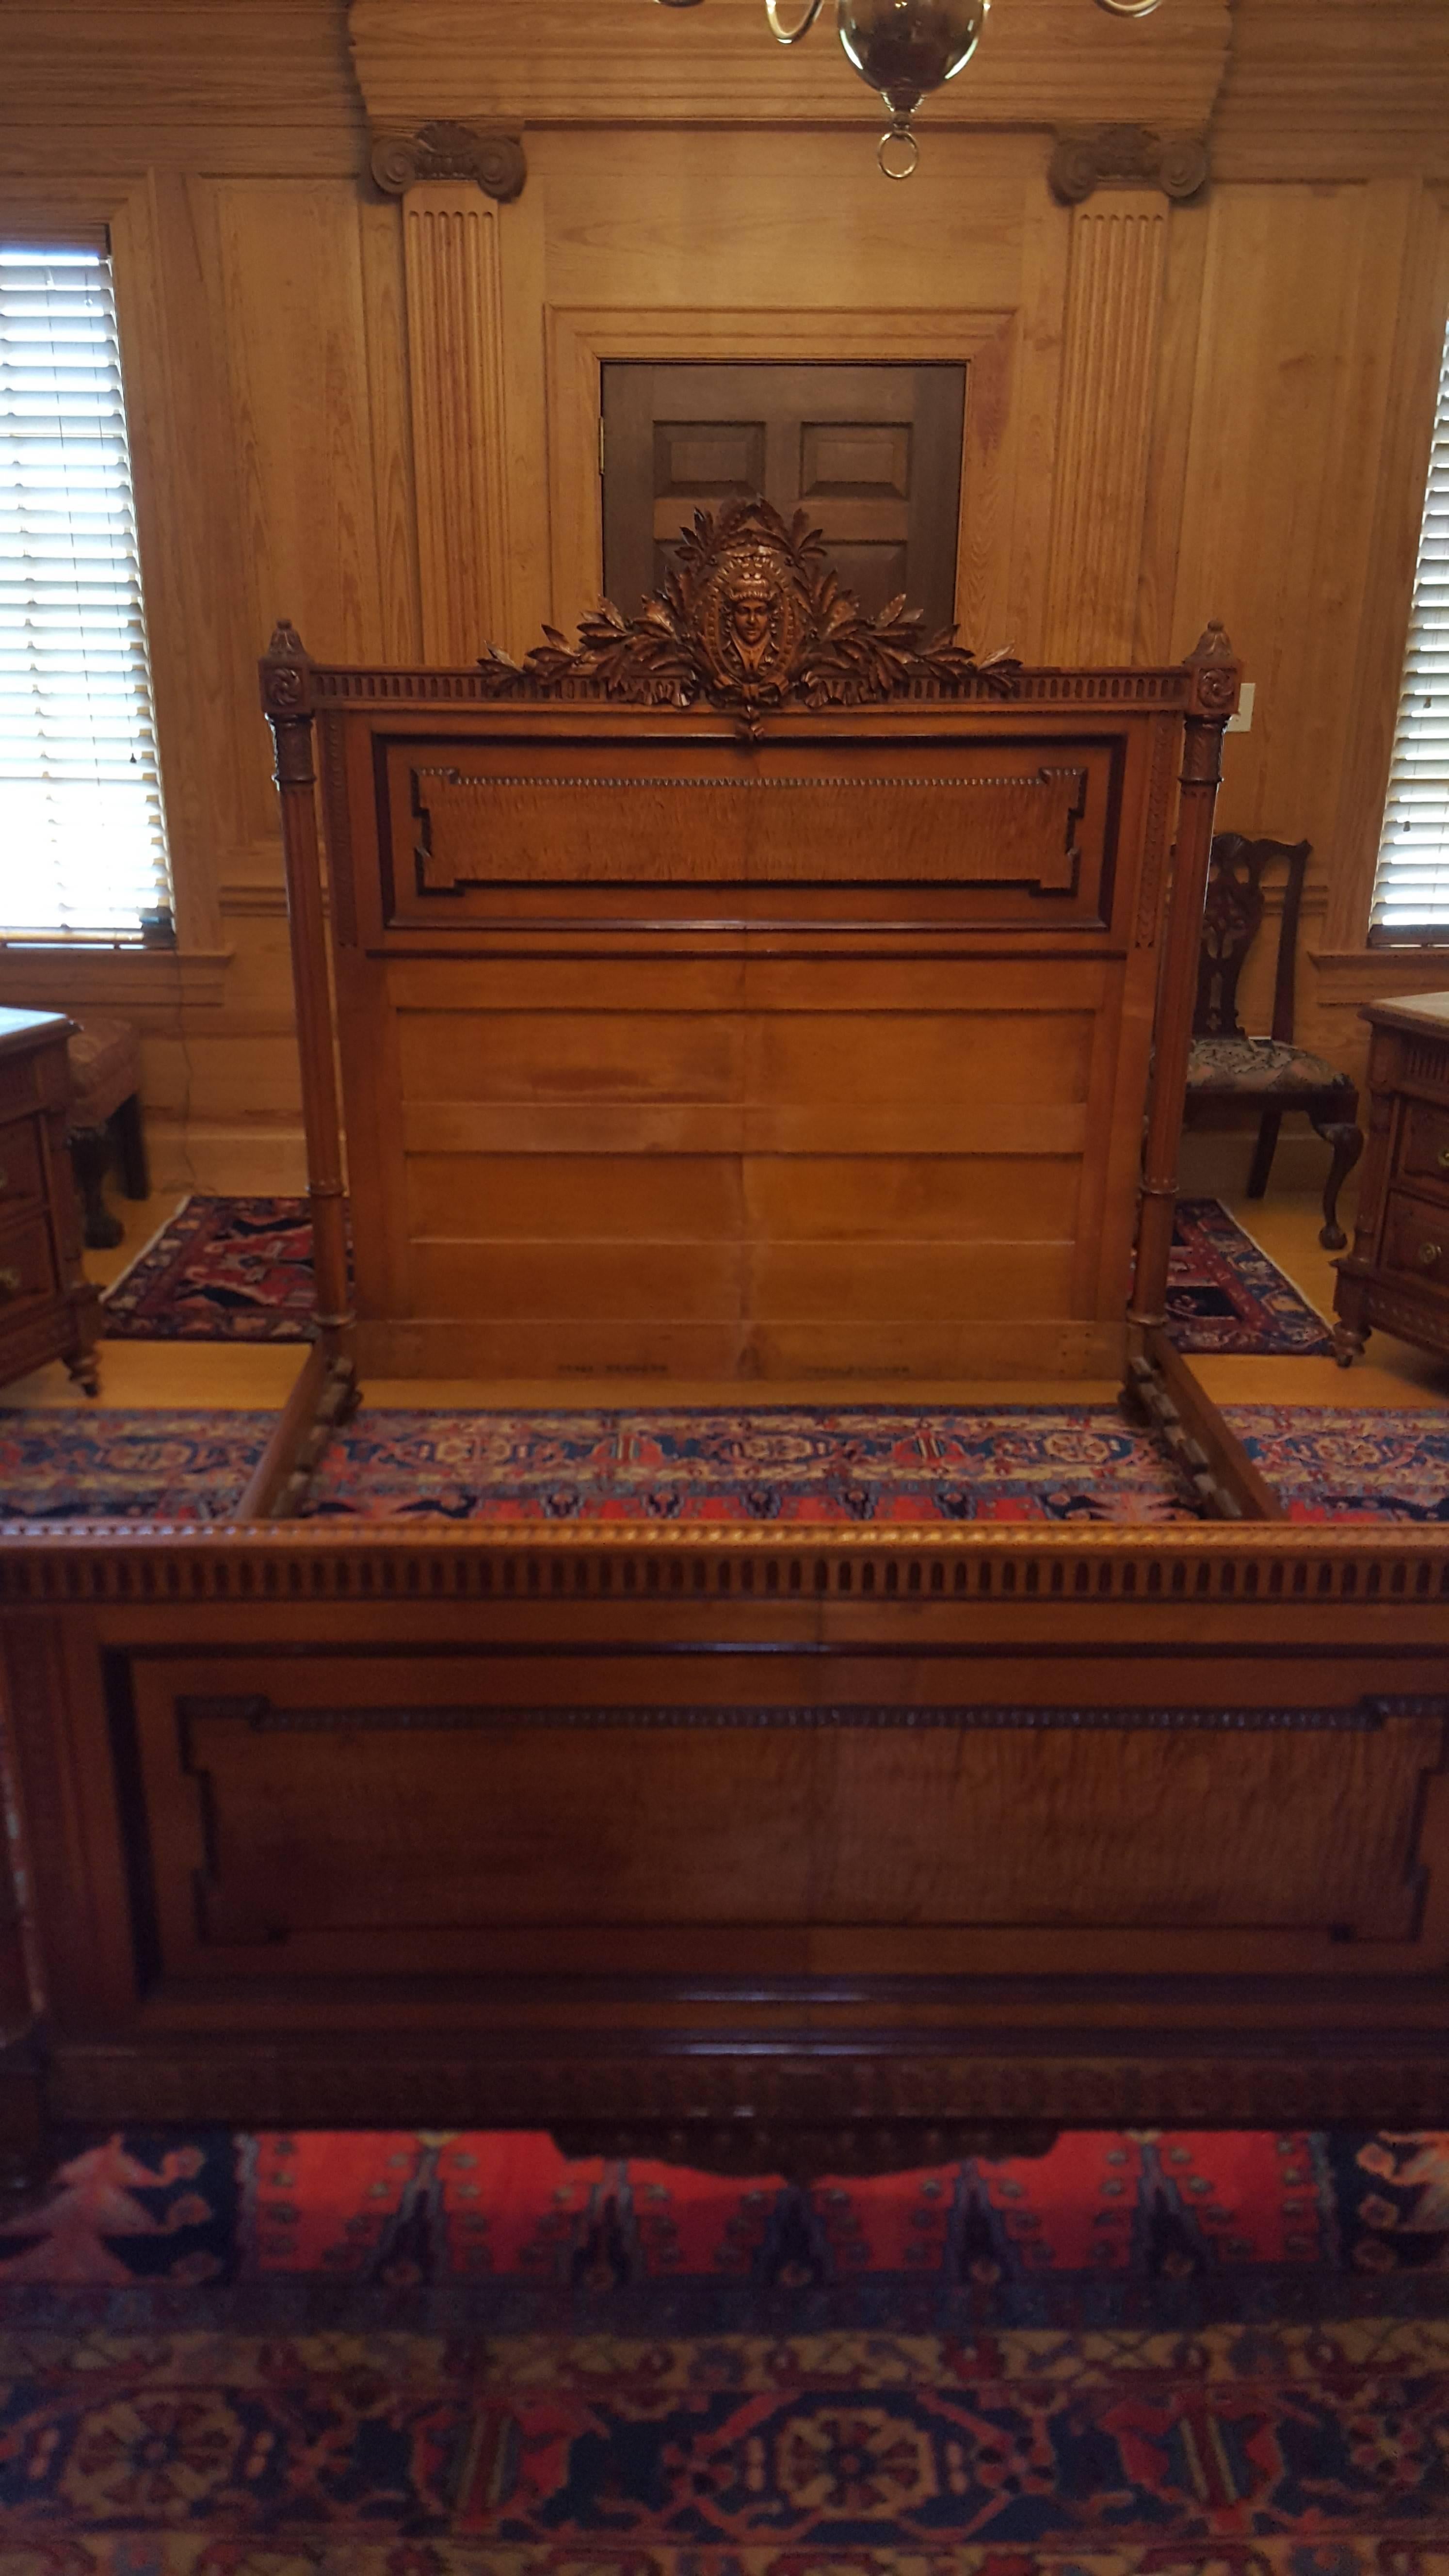 This is a remarkable 1870s Pottier & Stymus American Renaissance Revival bedroom suite that was built for the Flagler Mansion. It consists of three pieces. Each piece is stamped with the five digit number and the client name Flagler as shown in the